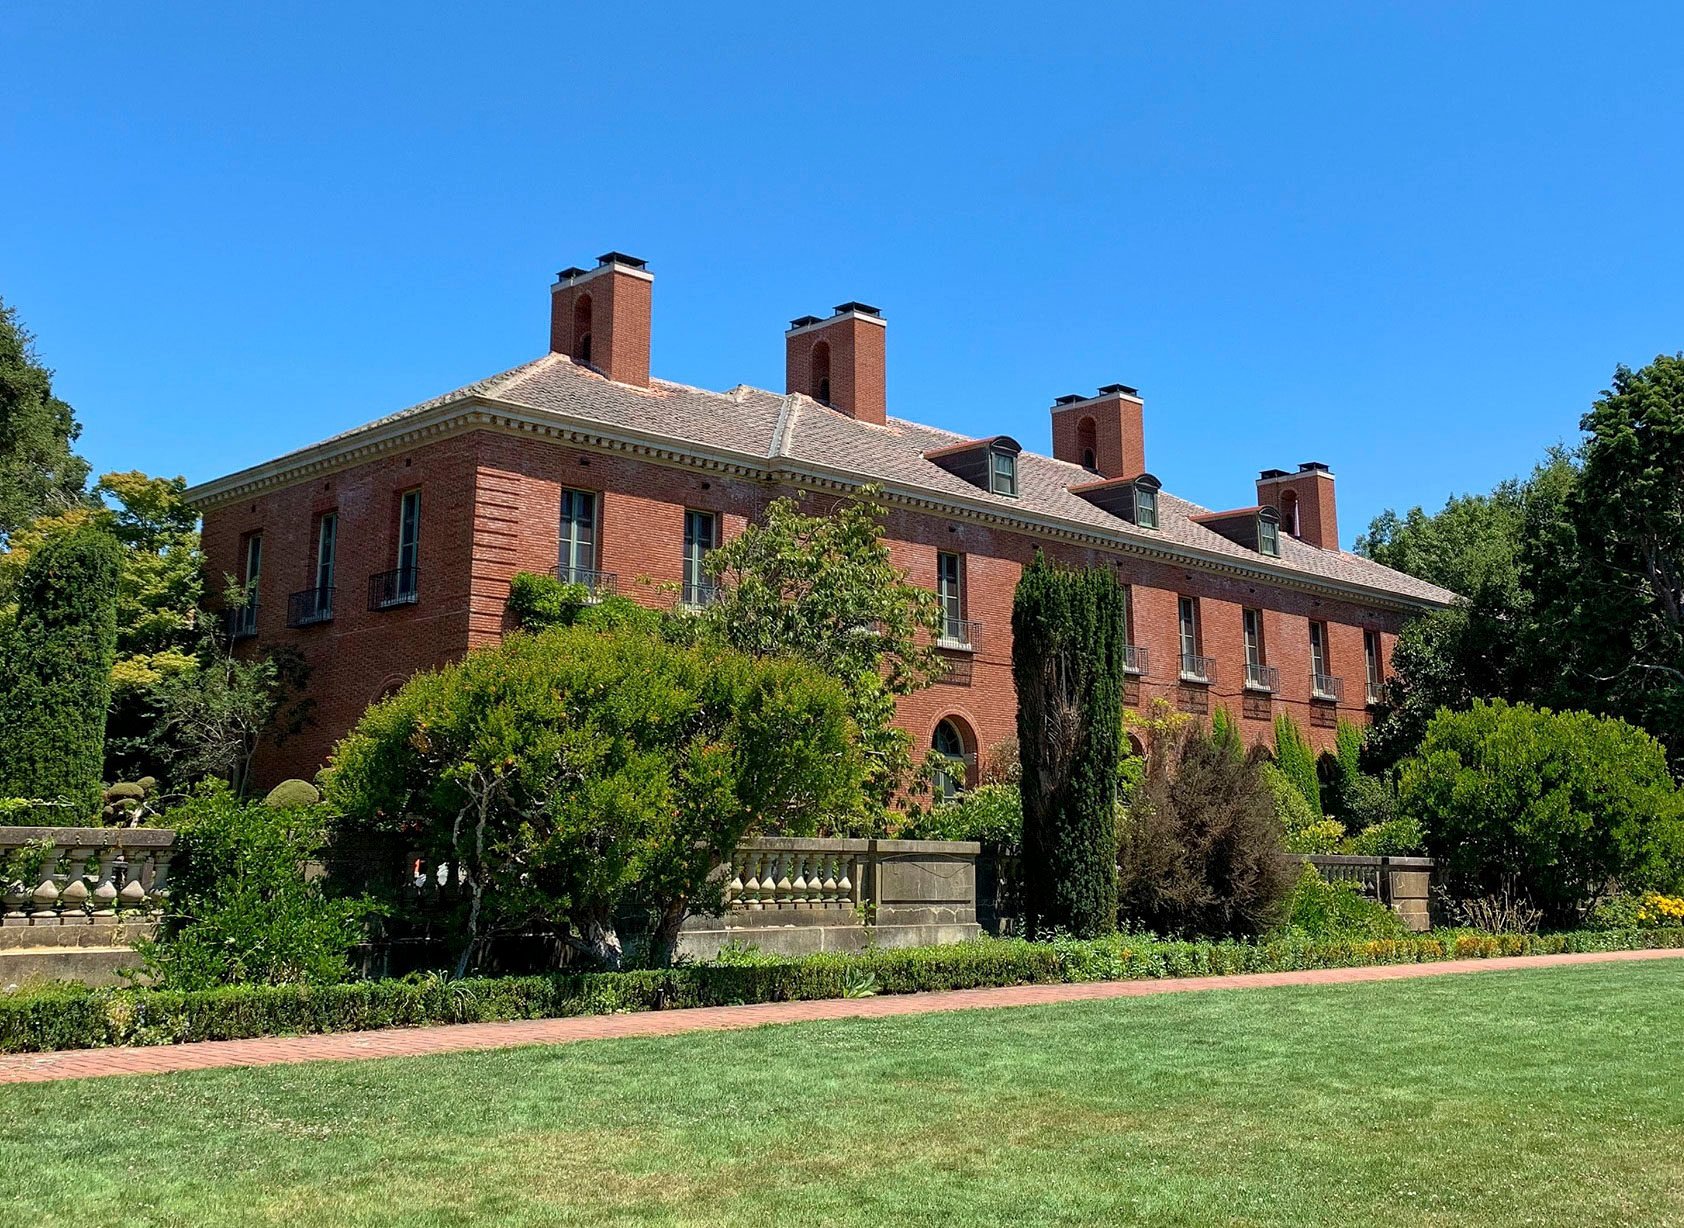 The Chinese and American leaders will meet at the secluded Filoli estate for their first face-to-face meeting in a year. Photo: Filoli